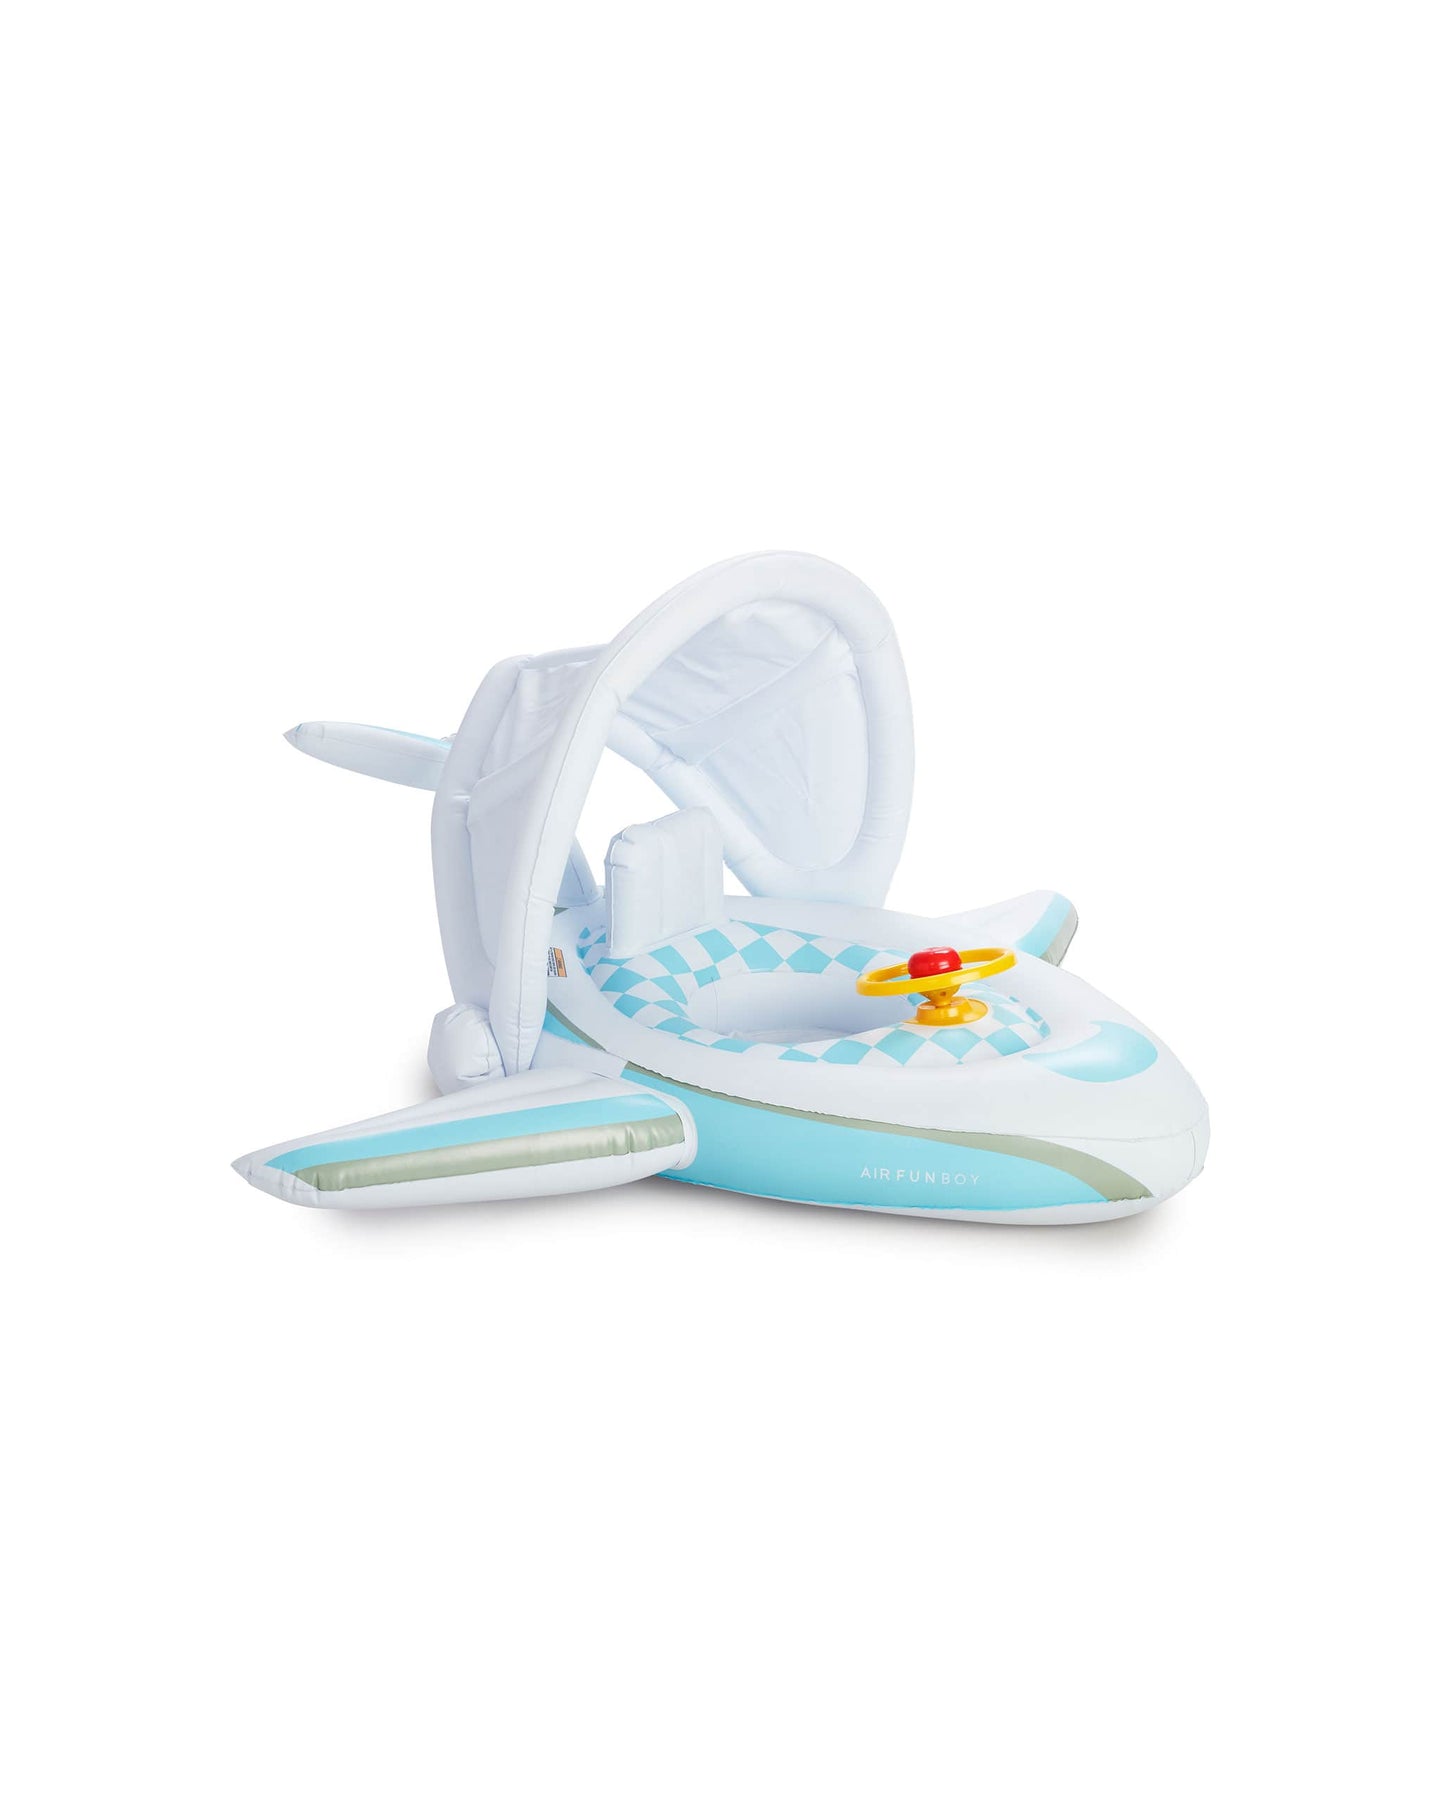 Baby Airplane Pool Float w/ Shade